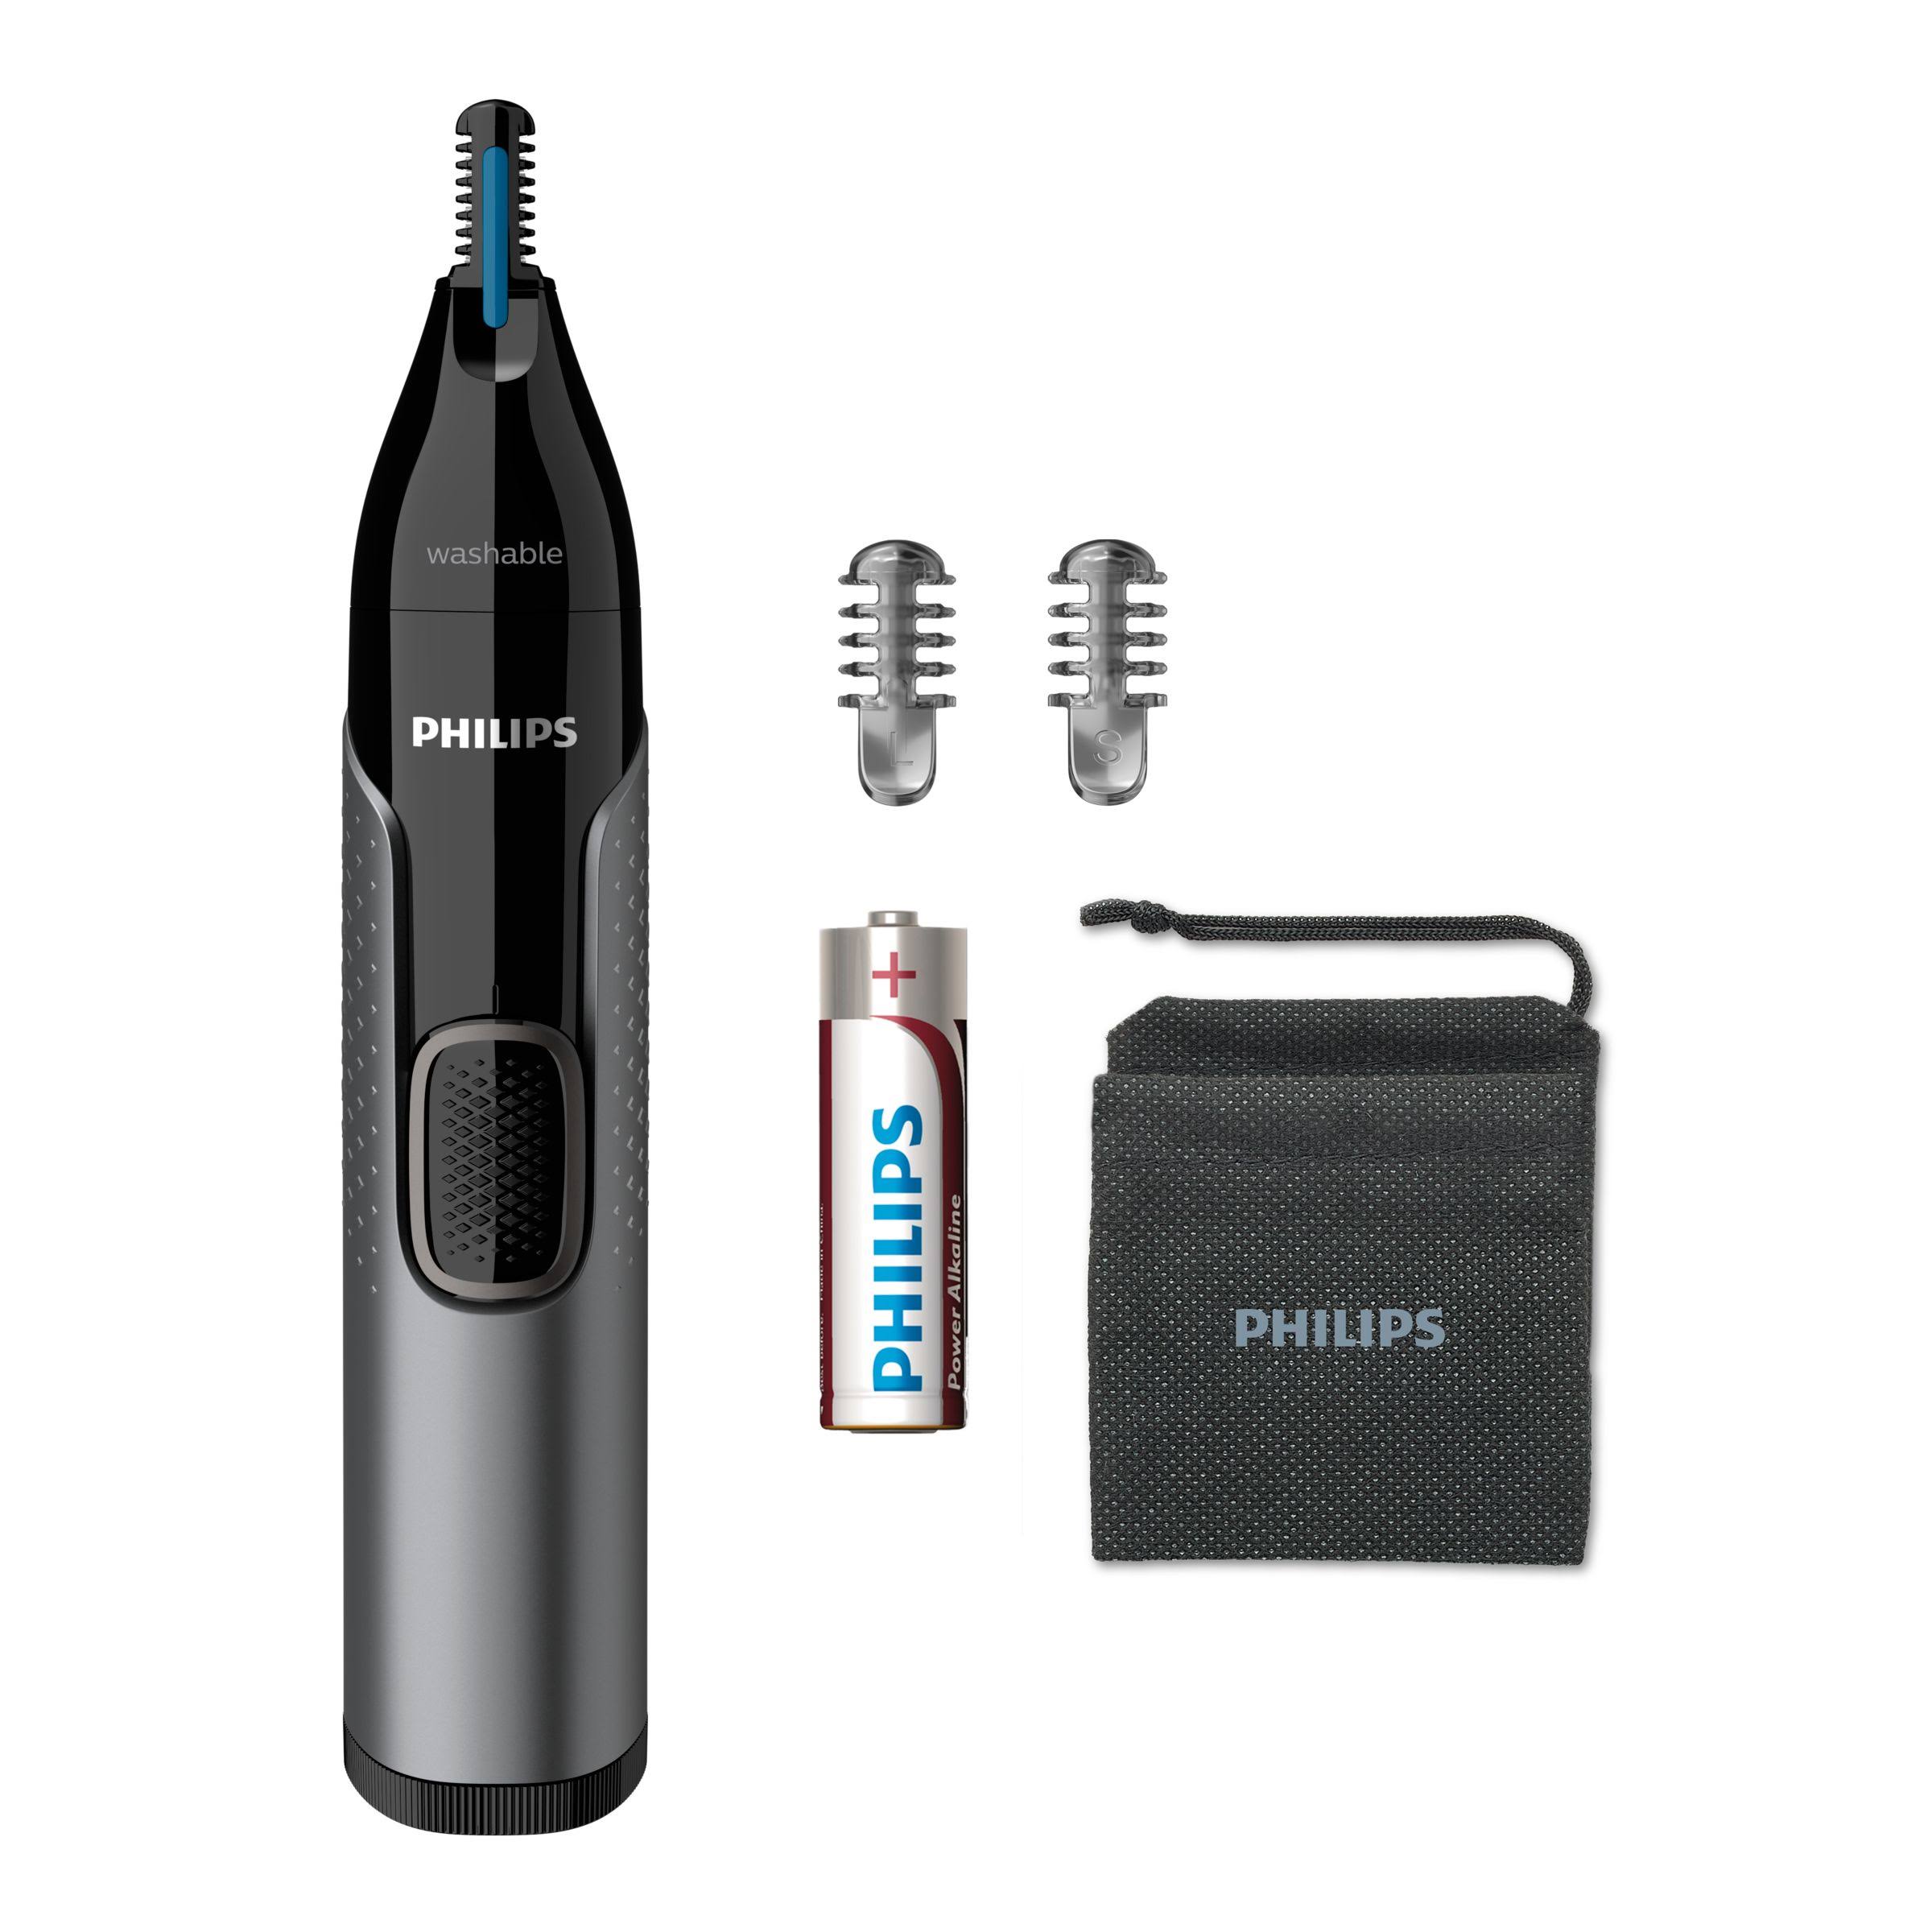 Philips NT3650/16 Series 3000 Nose Ear & Eyebrow Trimmer